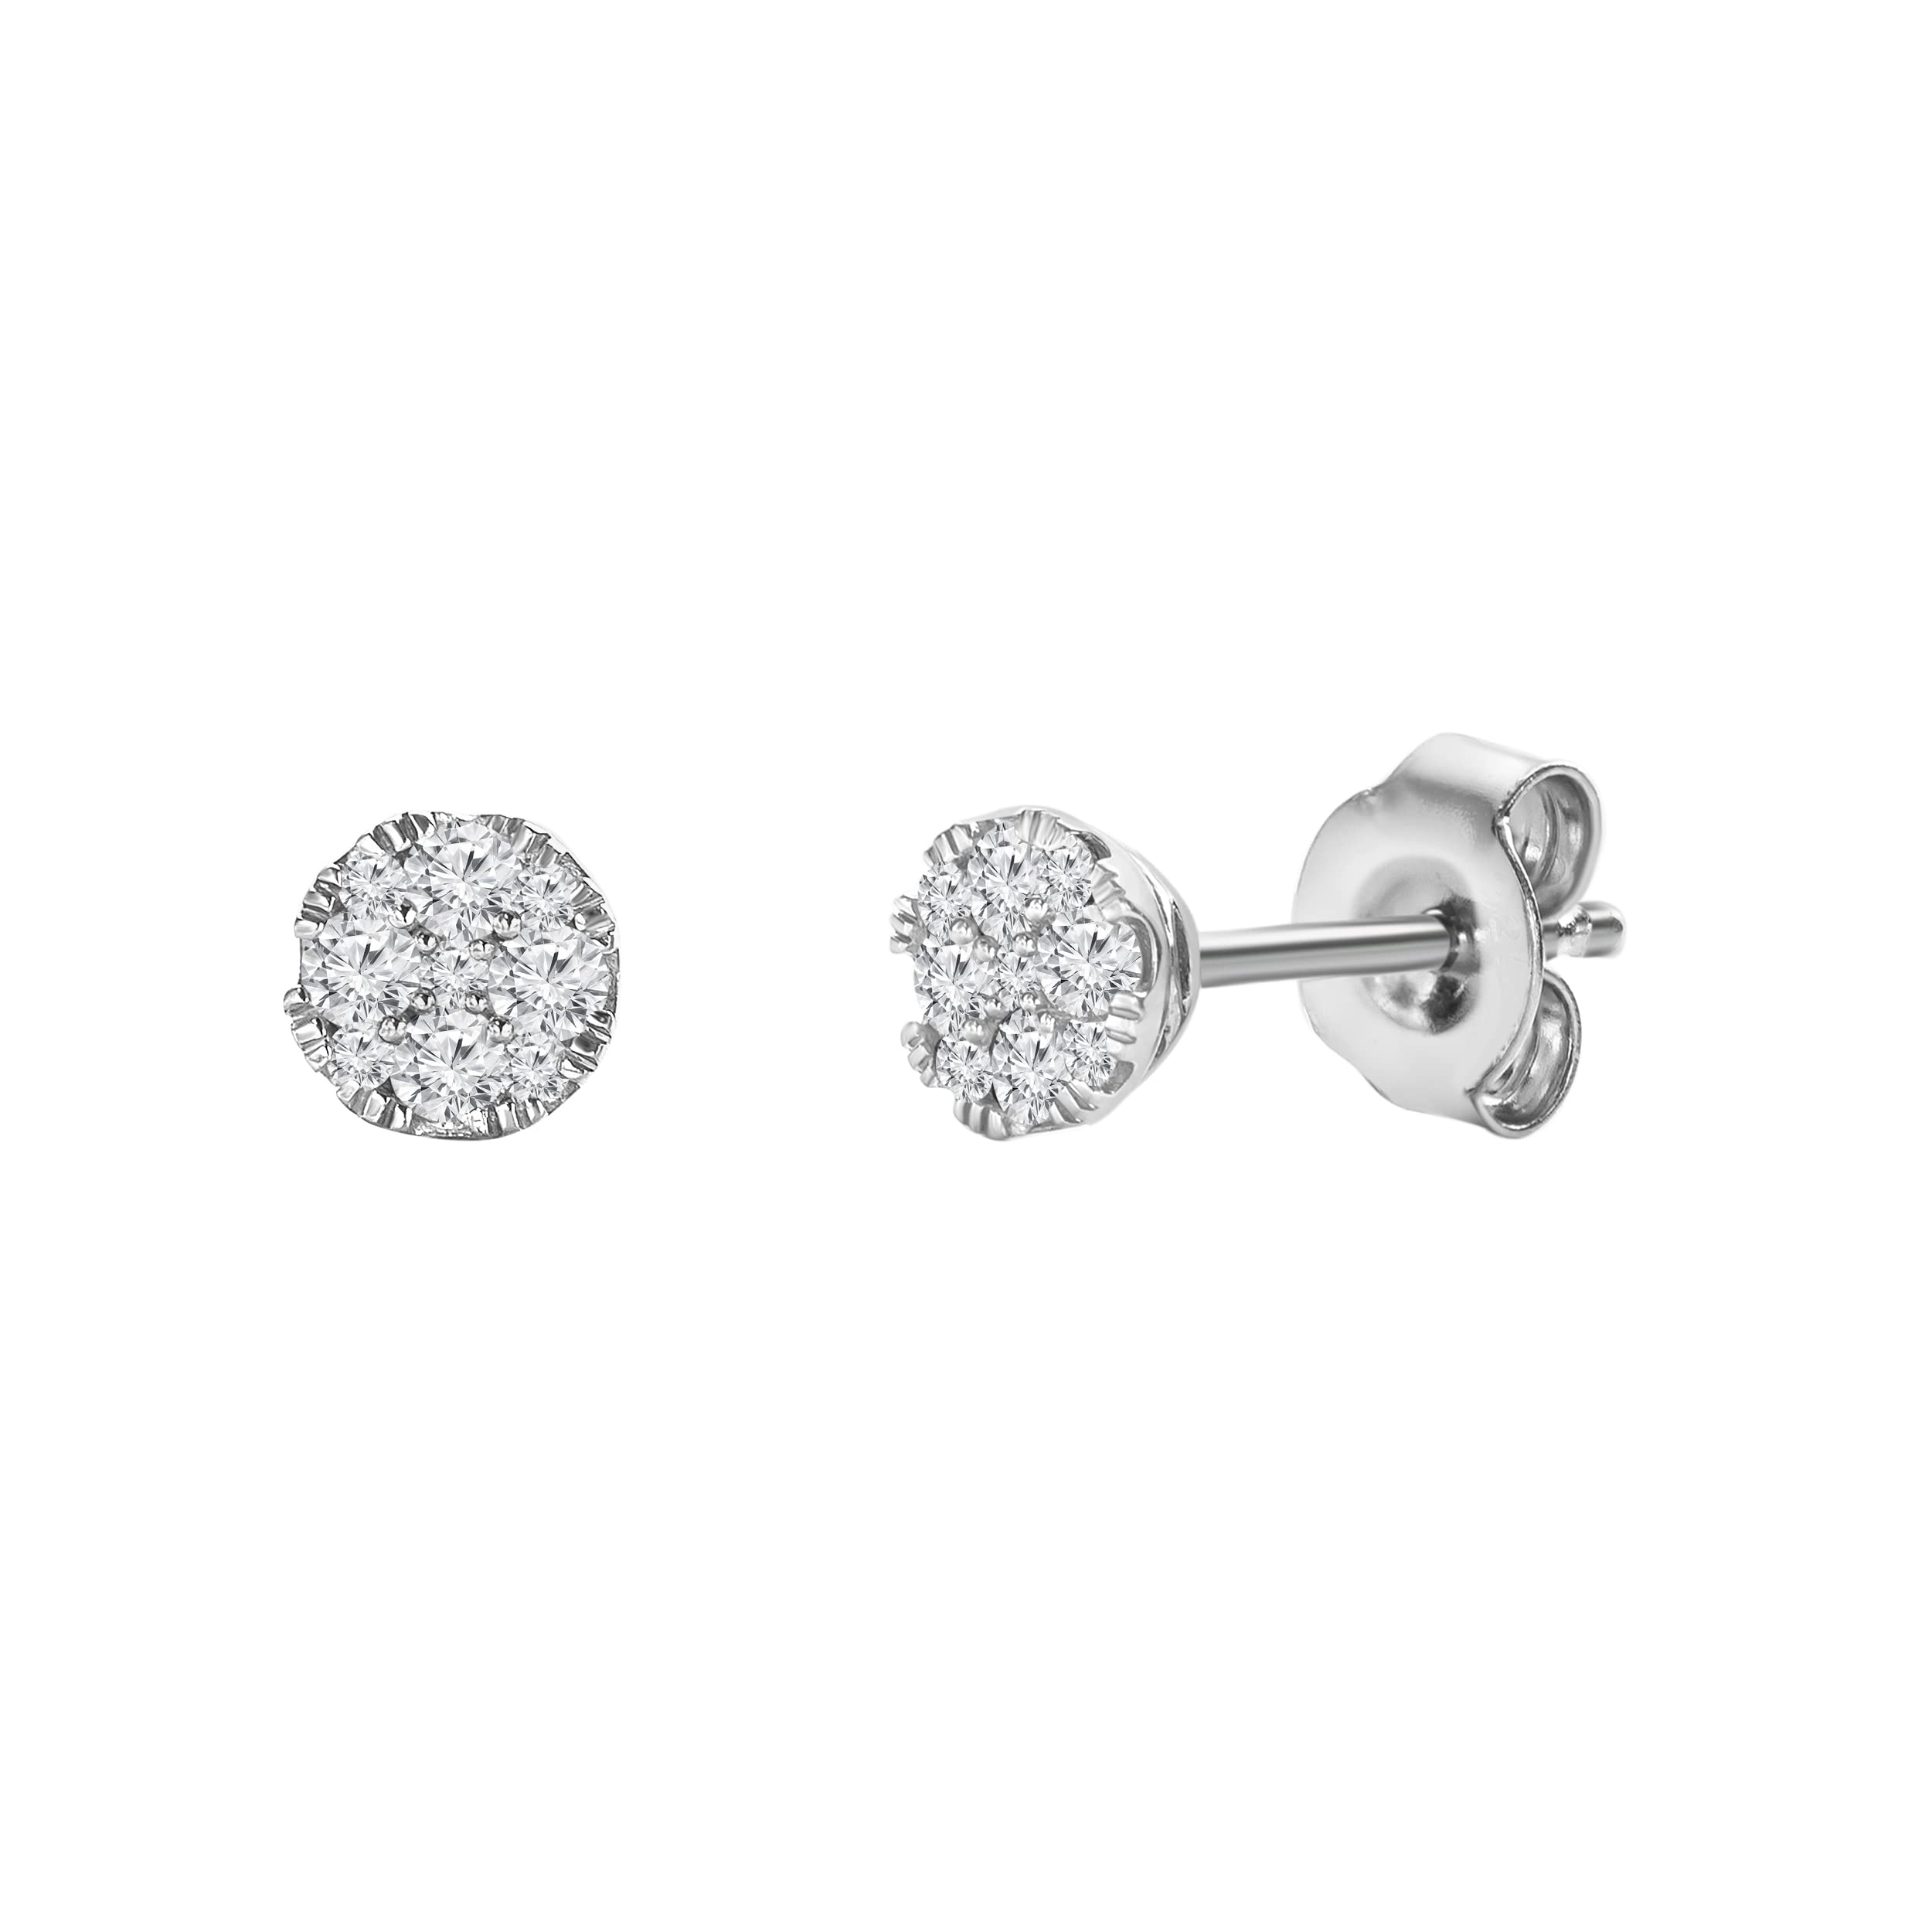 1/4 Carat, Sterling Silver Prong Set Round-cut Diamond Stud Earrings (J-K, I3) by La4ve Diamonds| Fashion Jewelry for Women | Gift Box Included (White, Yellow & Rose Gold Plated)